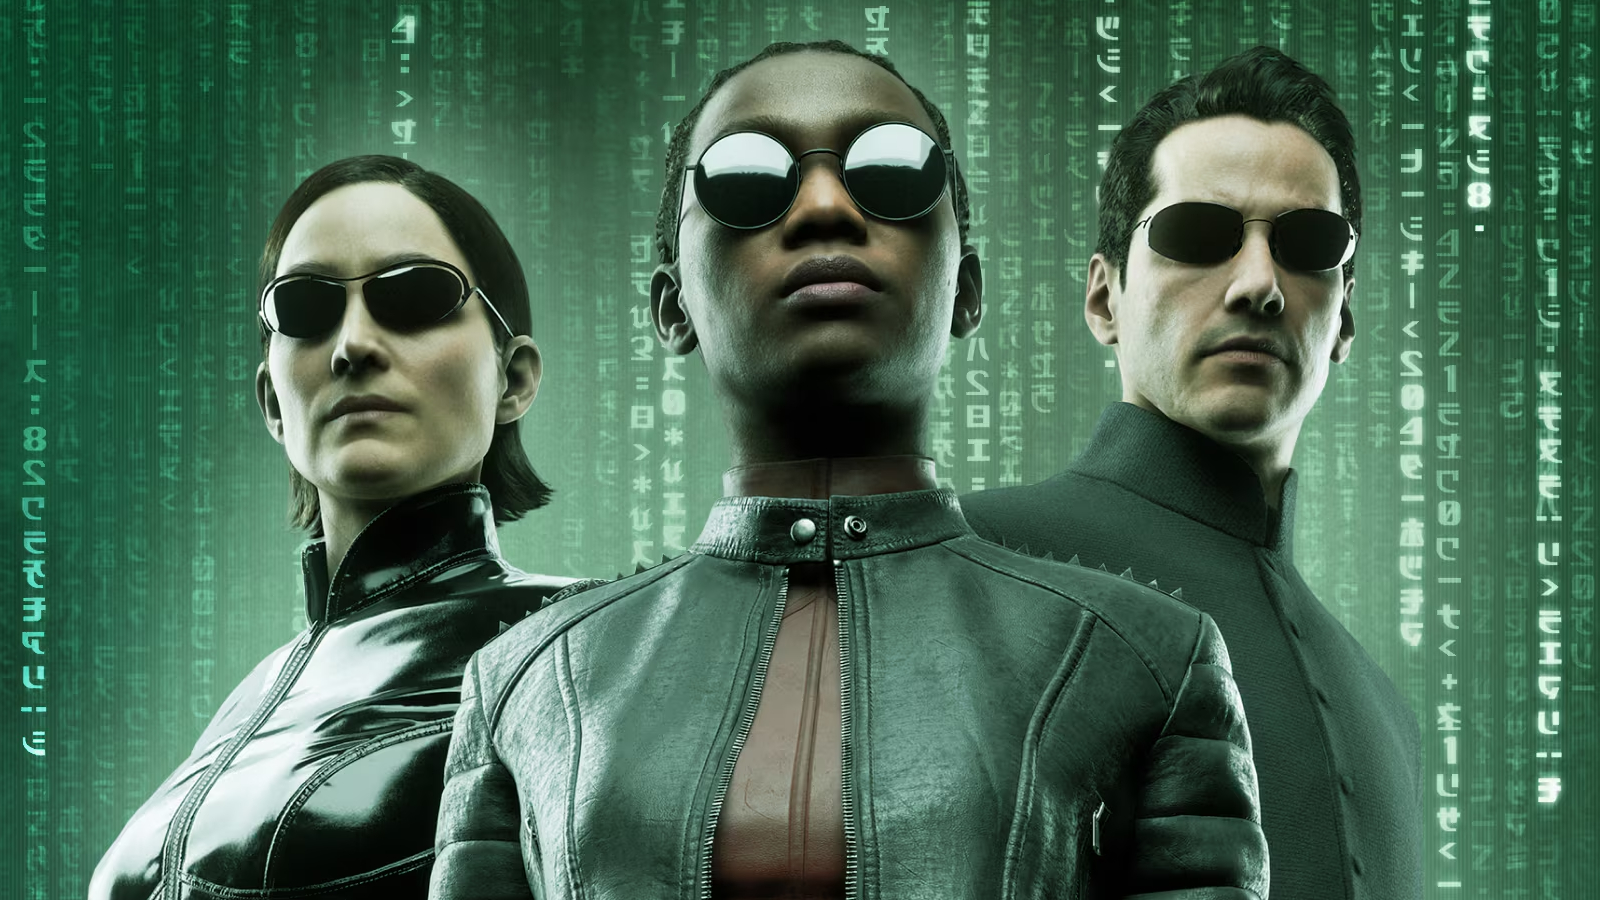 Trinity, IO, and Neo in cropped key art for The Matrix Awakens